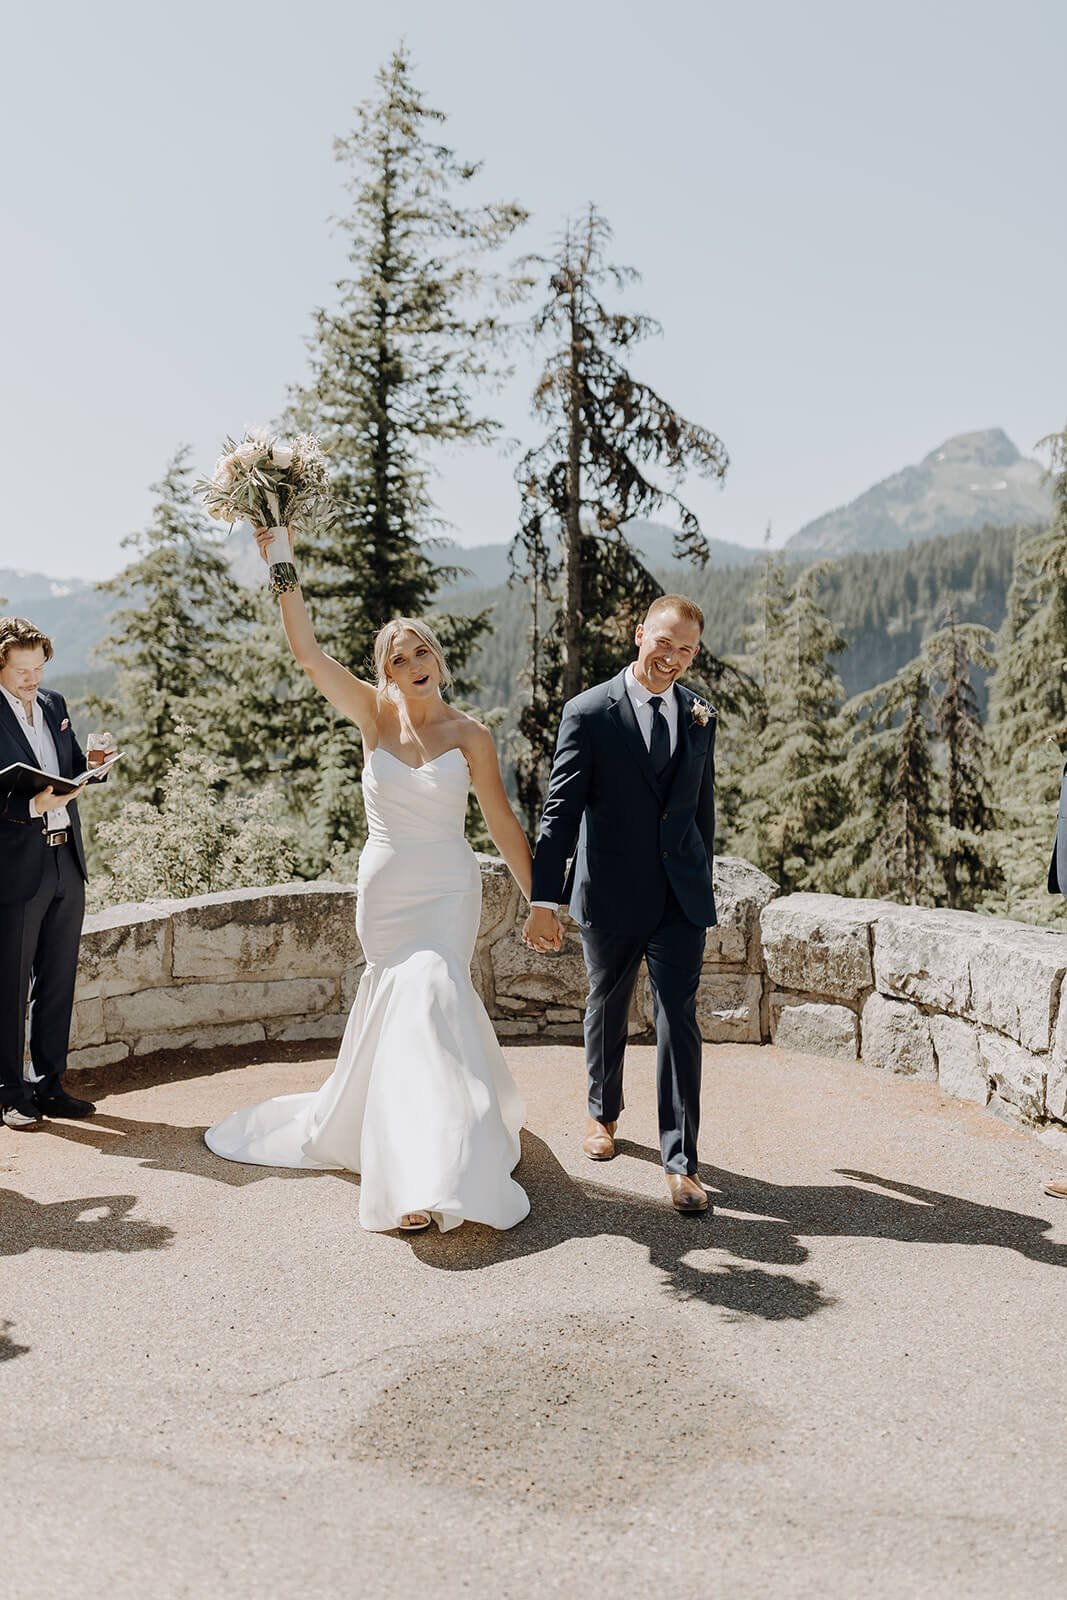 Bride and groom cheer as they exit the Mount Rainier wedding ceremony